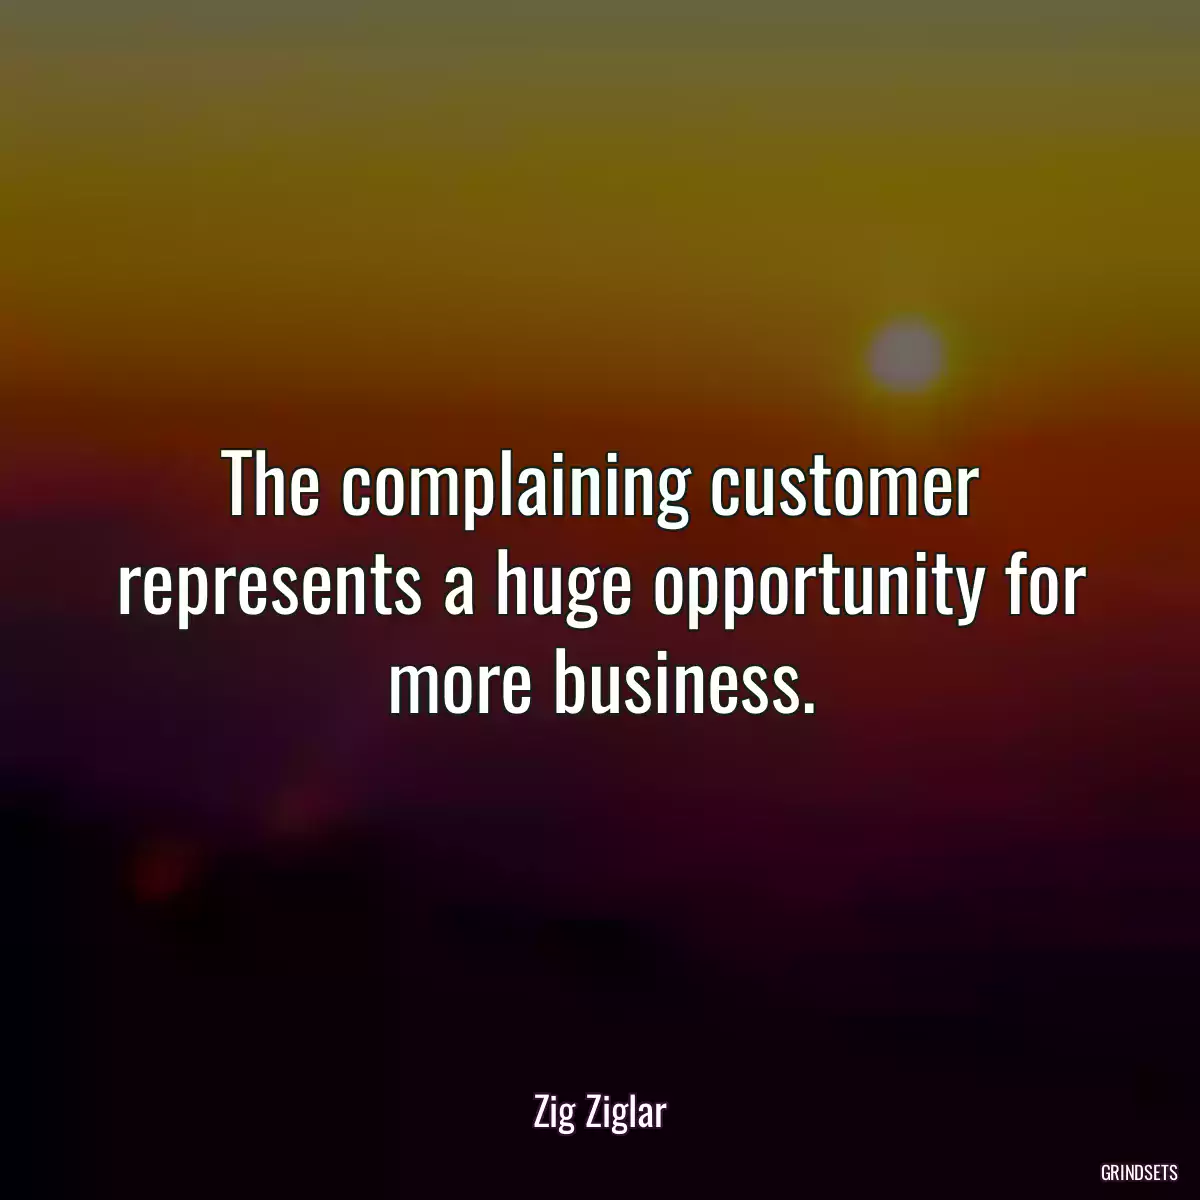 The complaining customer represents a huge opportunity for more business.